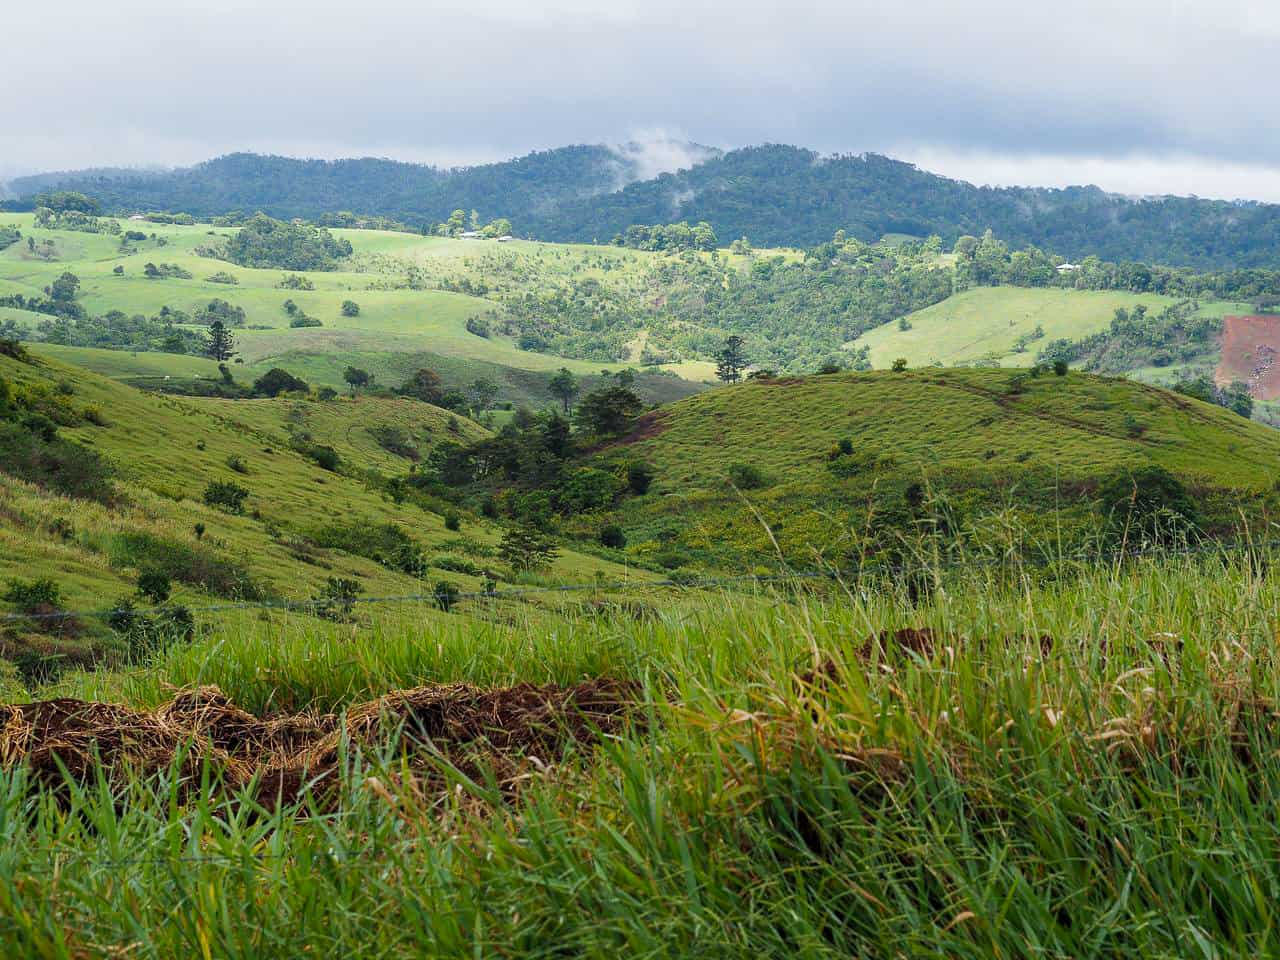 The Atherton Tablelands countryside in Far North Queensland, Australia // Travel Mermaid